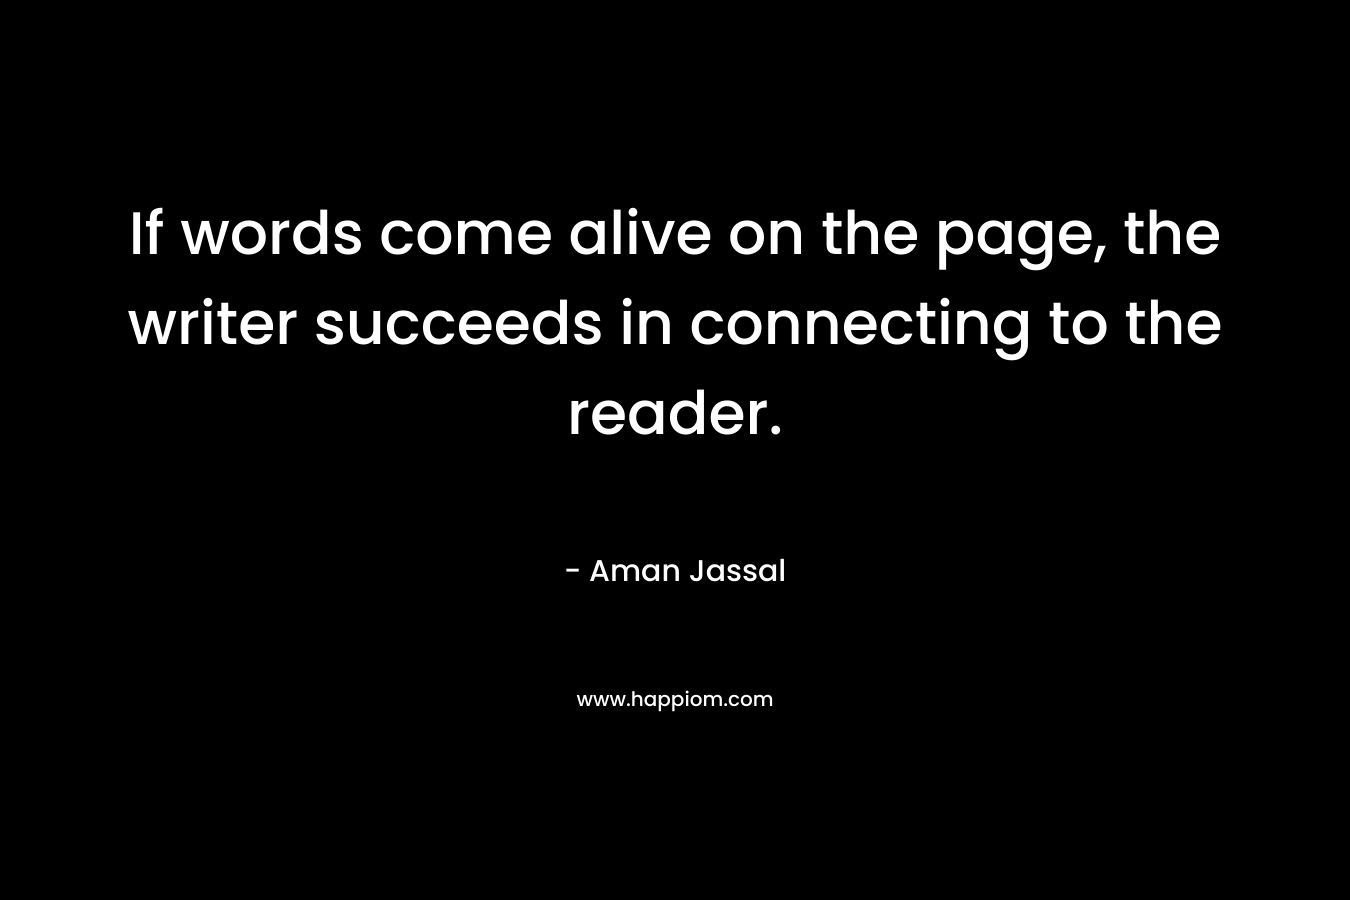 If words come alive on the page, the writer succeeds in connecting to the reader. – Aman Jassal